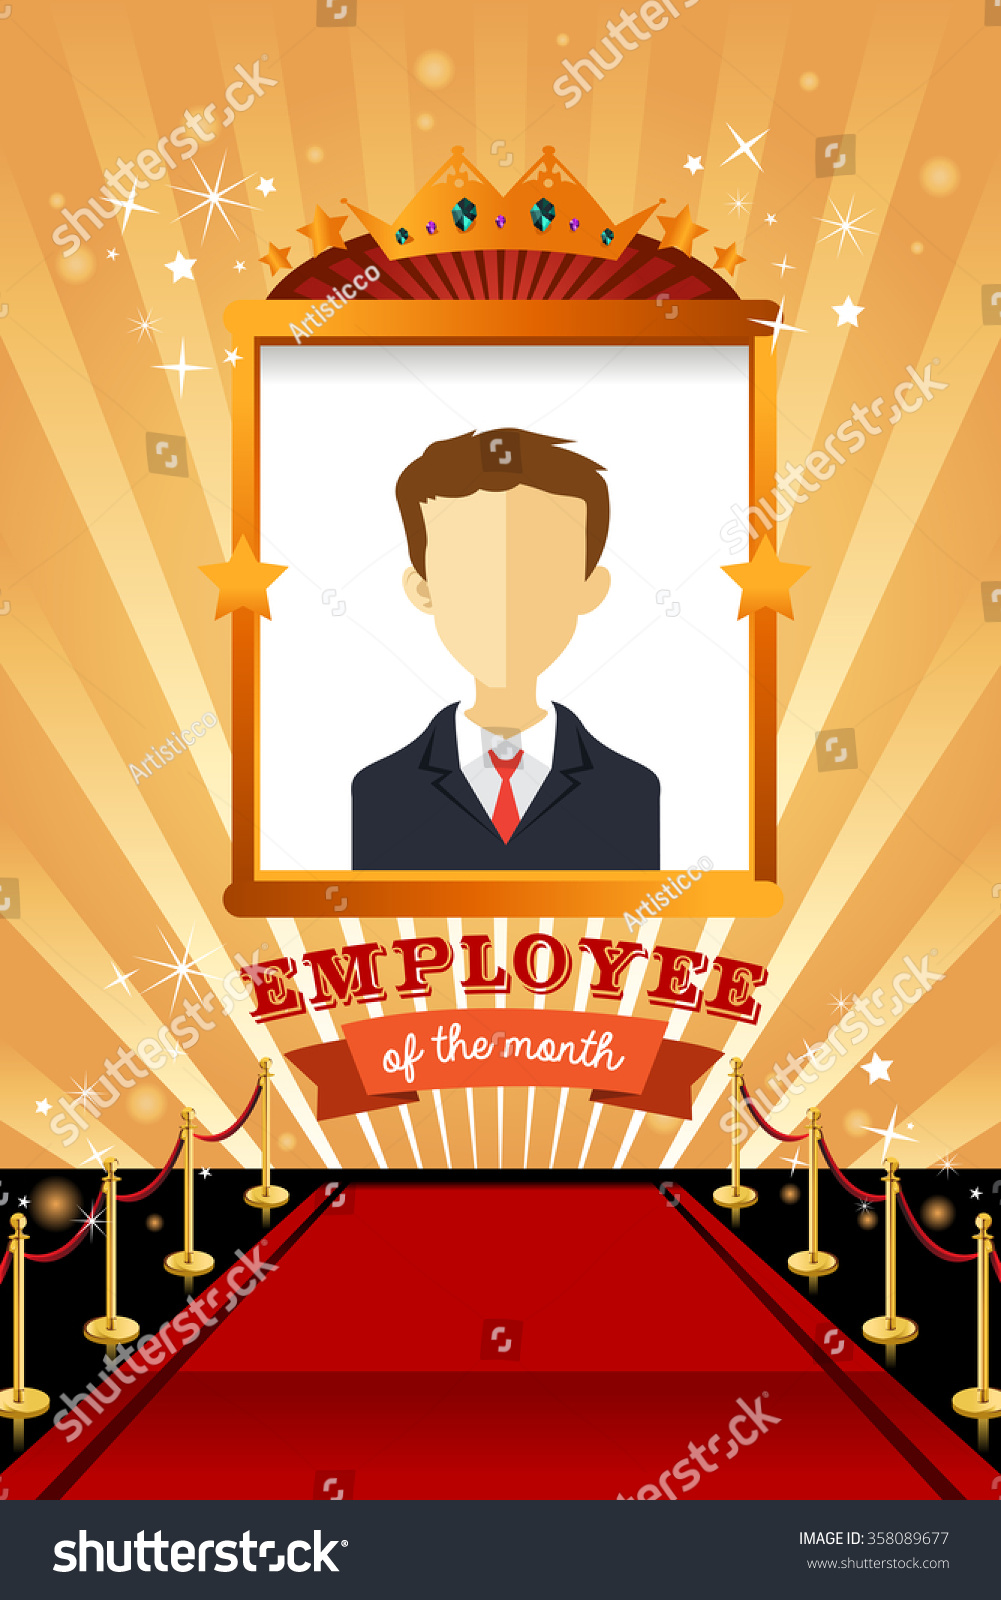 employee of the month clip art - photo #44